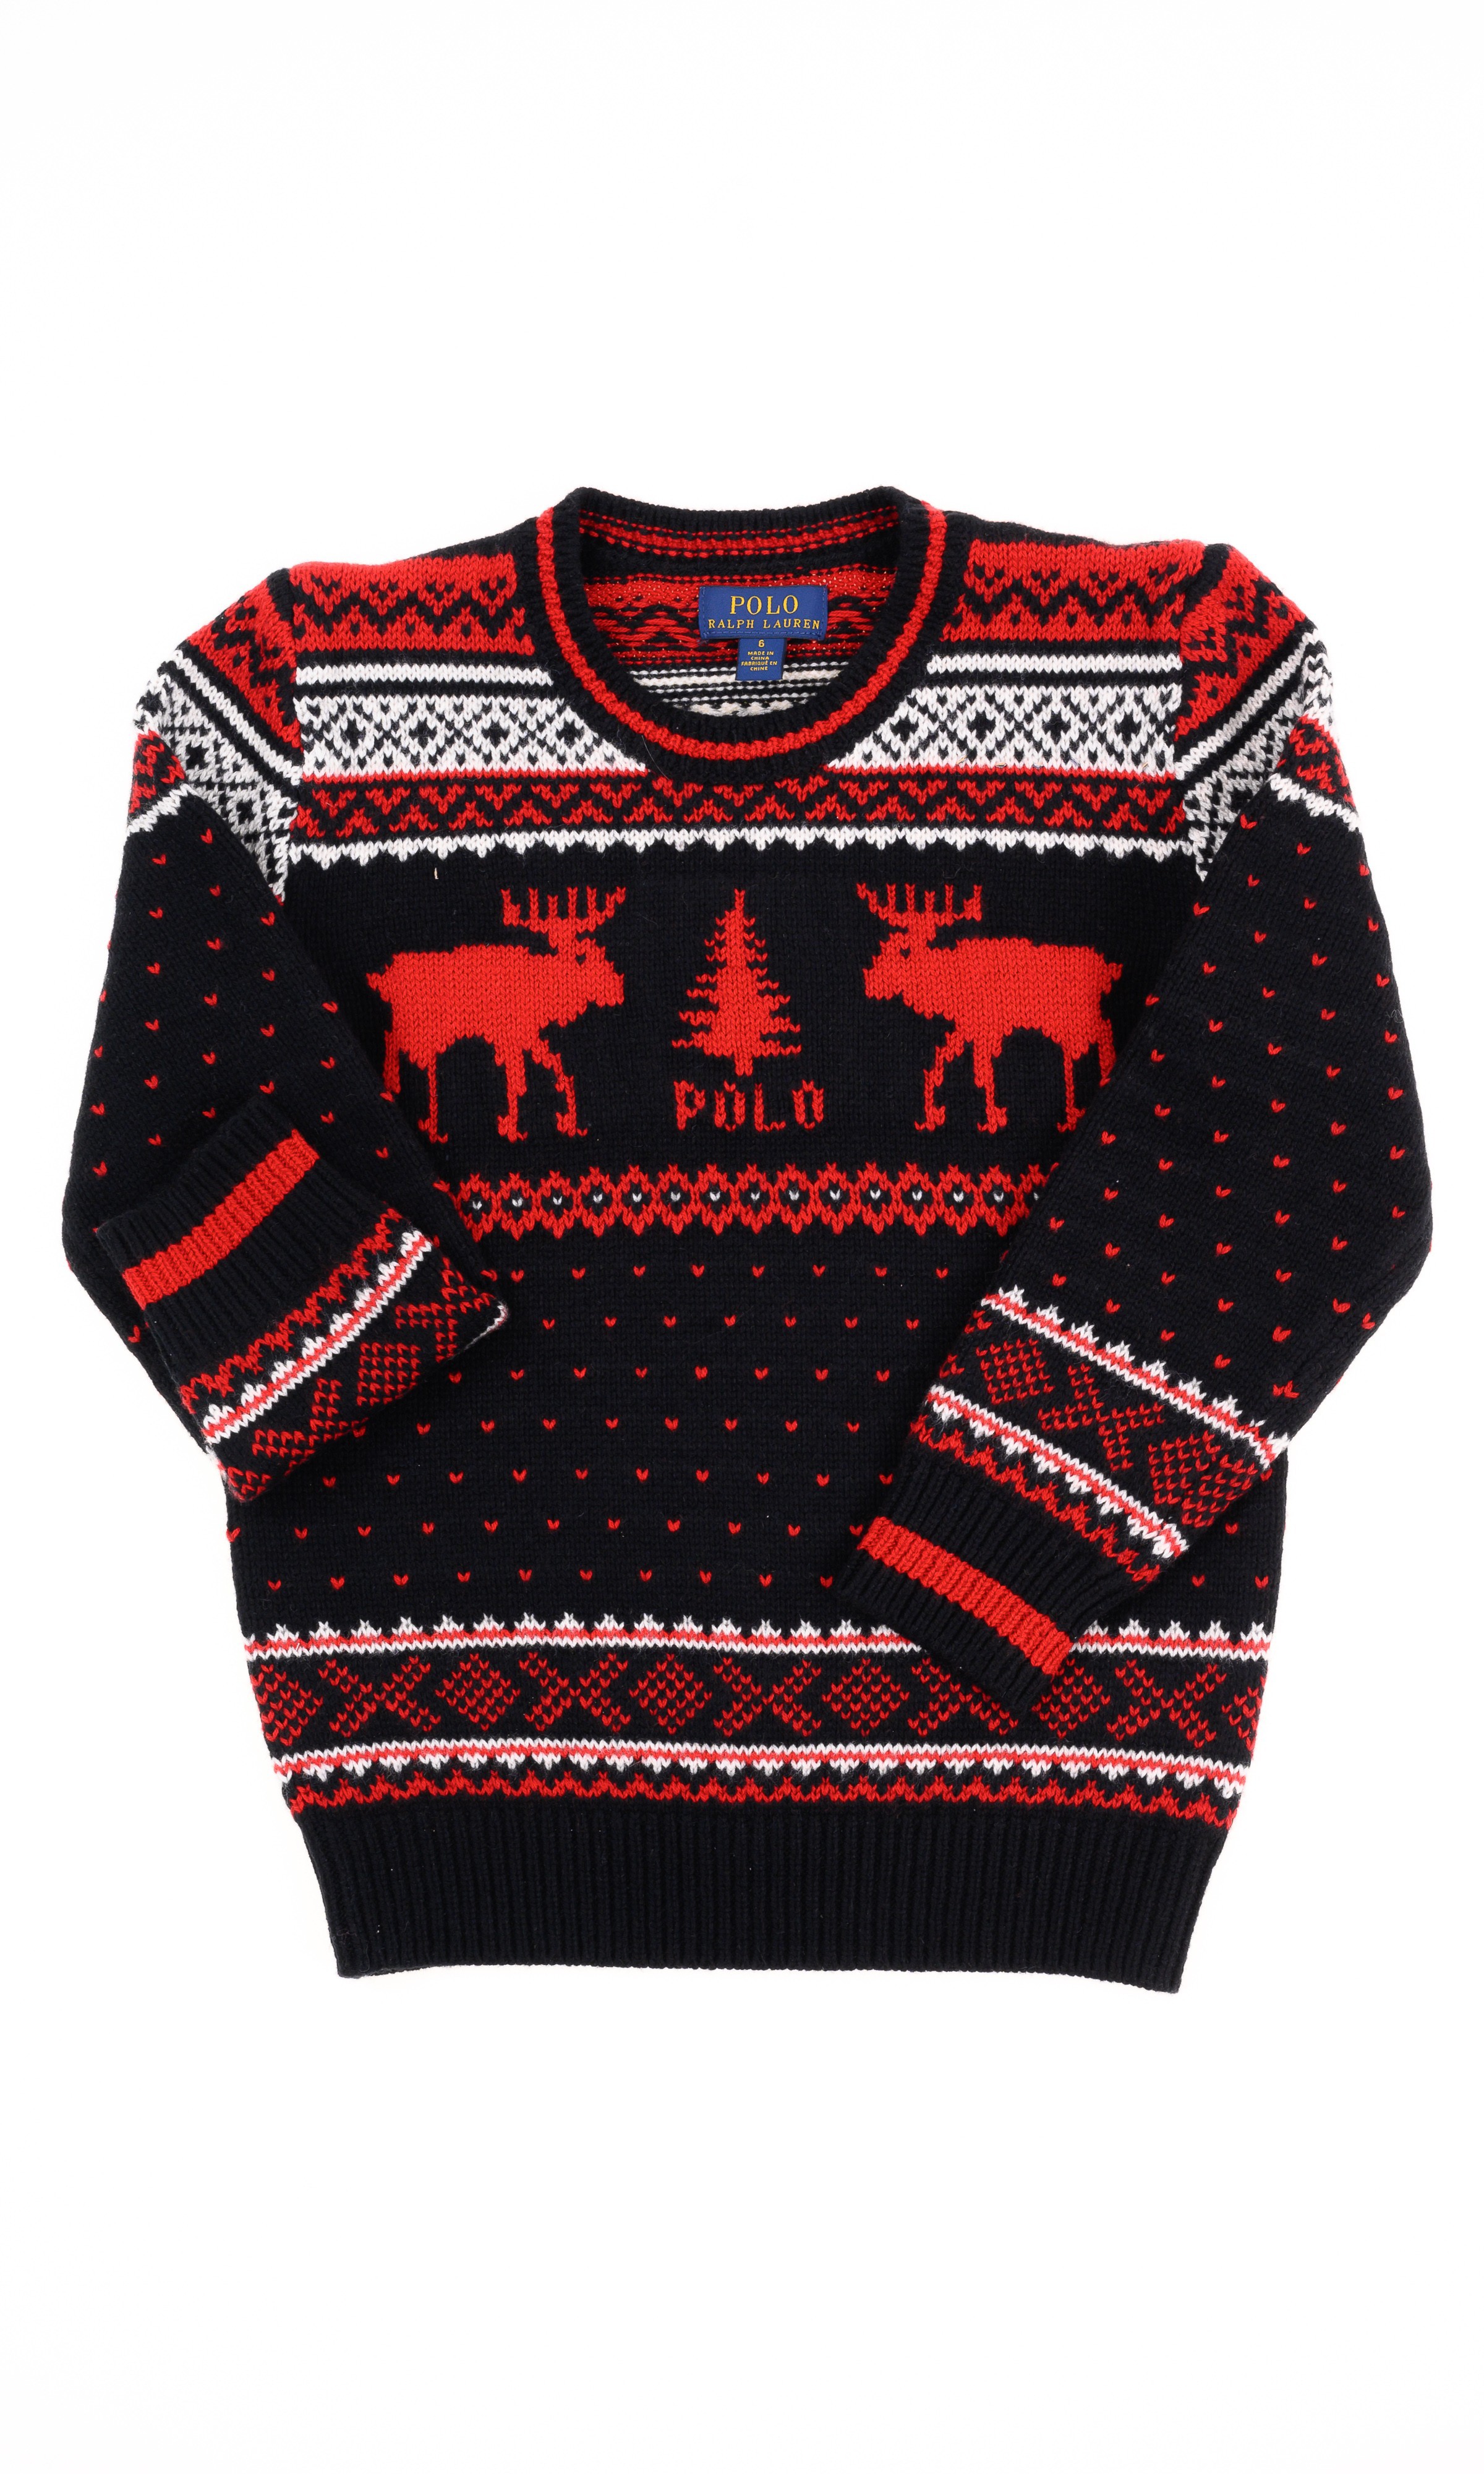 Black and red sweater with a Christmas motif, Polo Ralph Lauren - Celebrity  Club